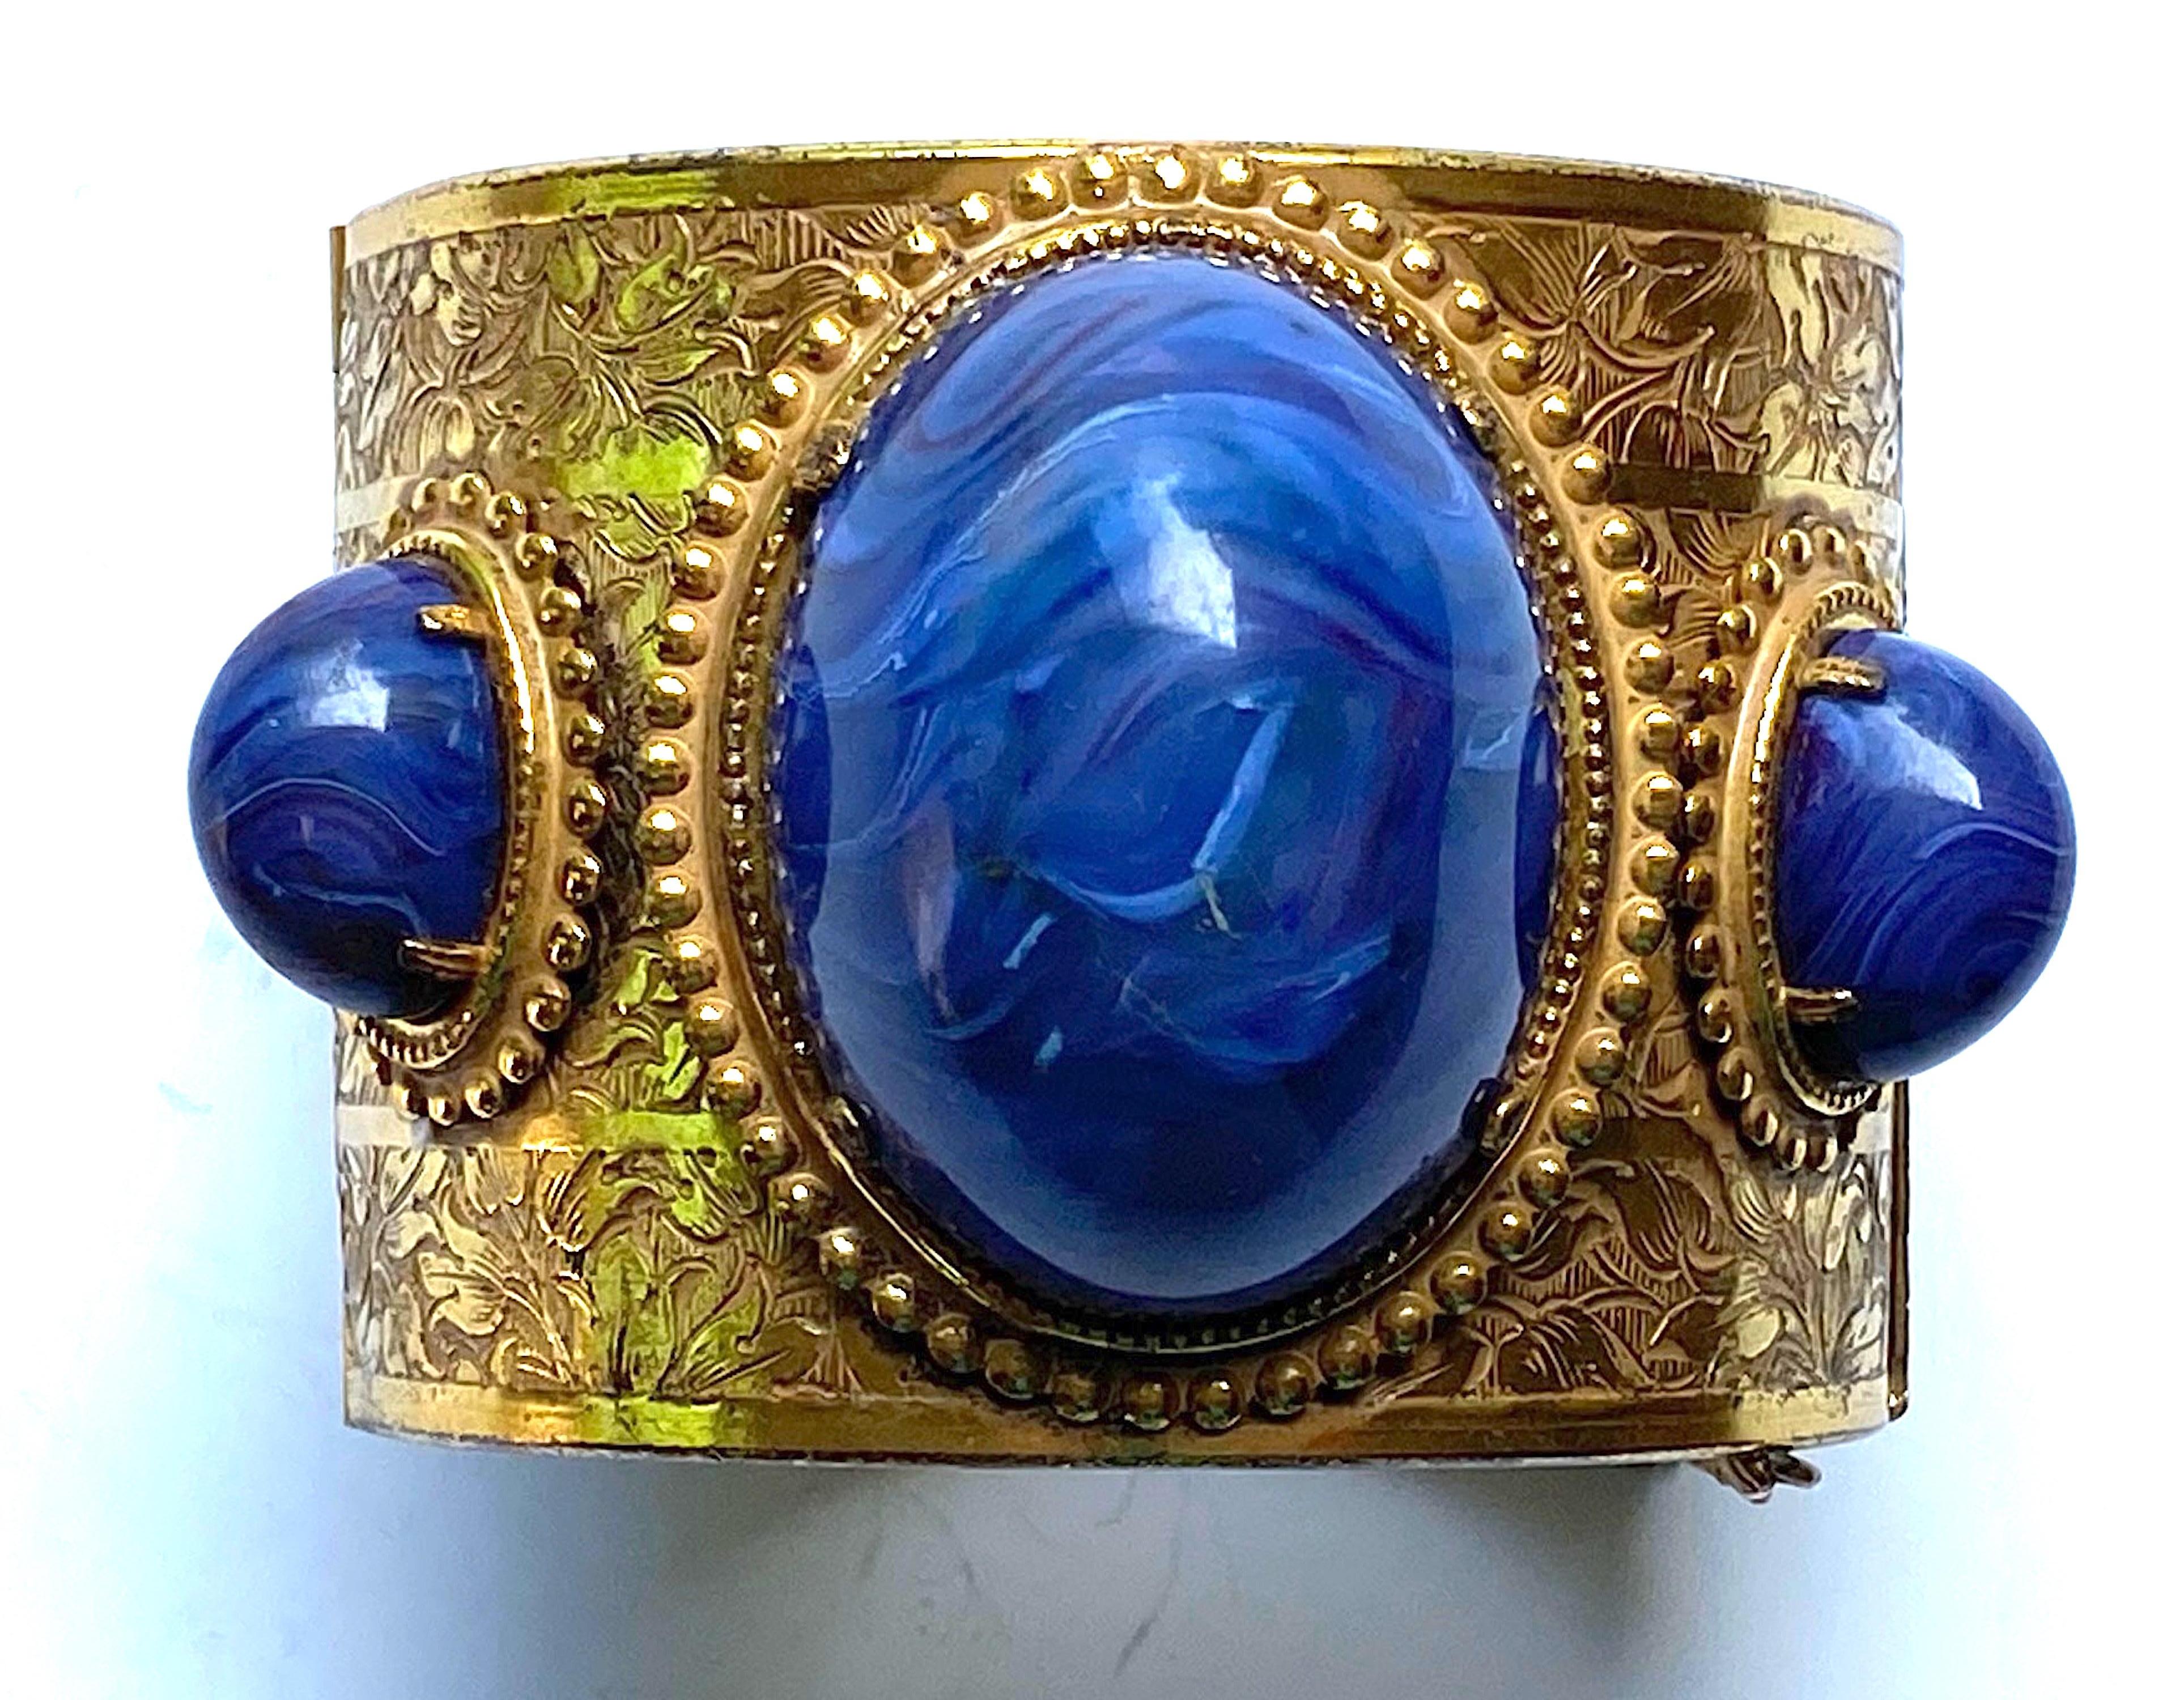 Women's Miriam Haskell Gold and Faux Blue Lapis Cabochon Large Cuff Bracelet, 1960/70s